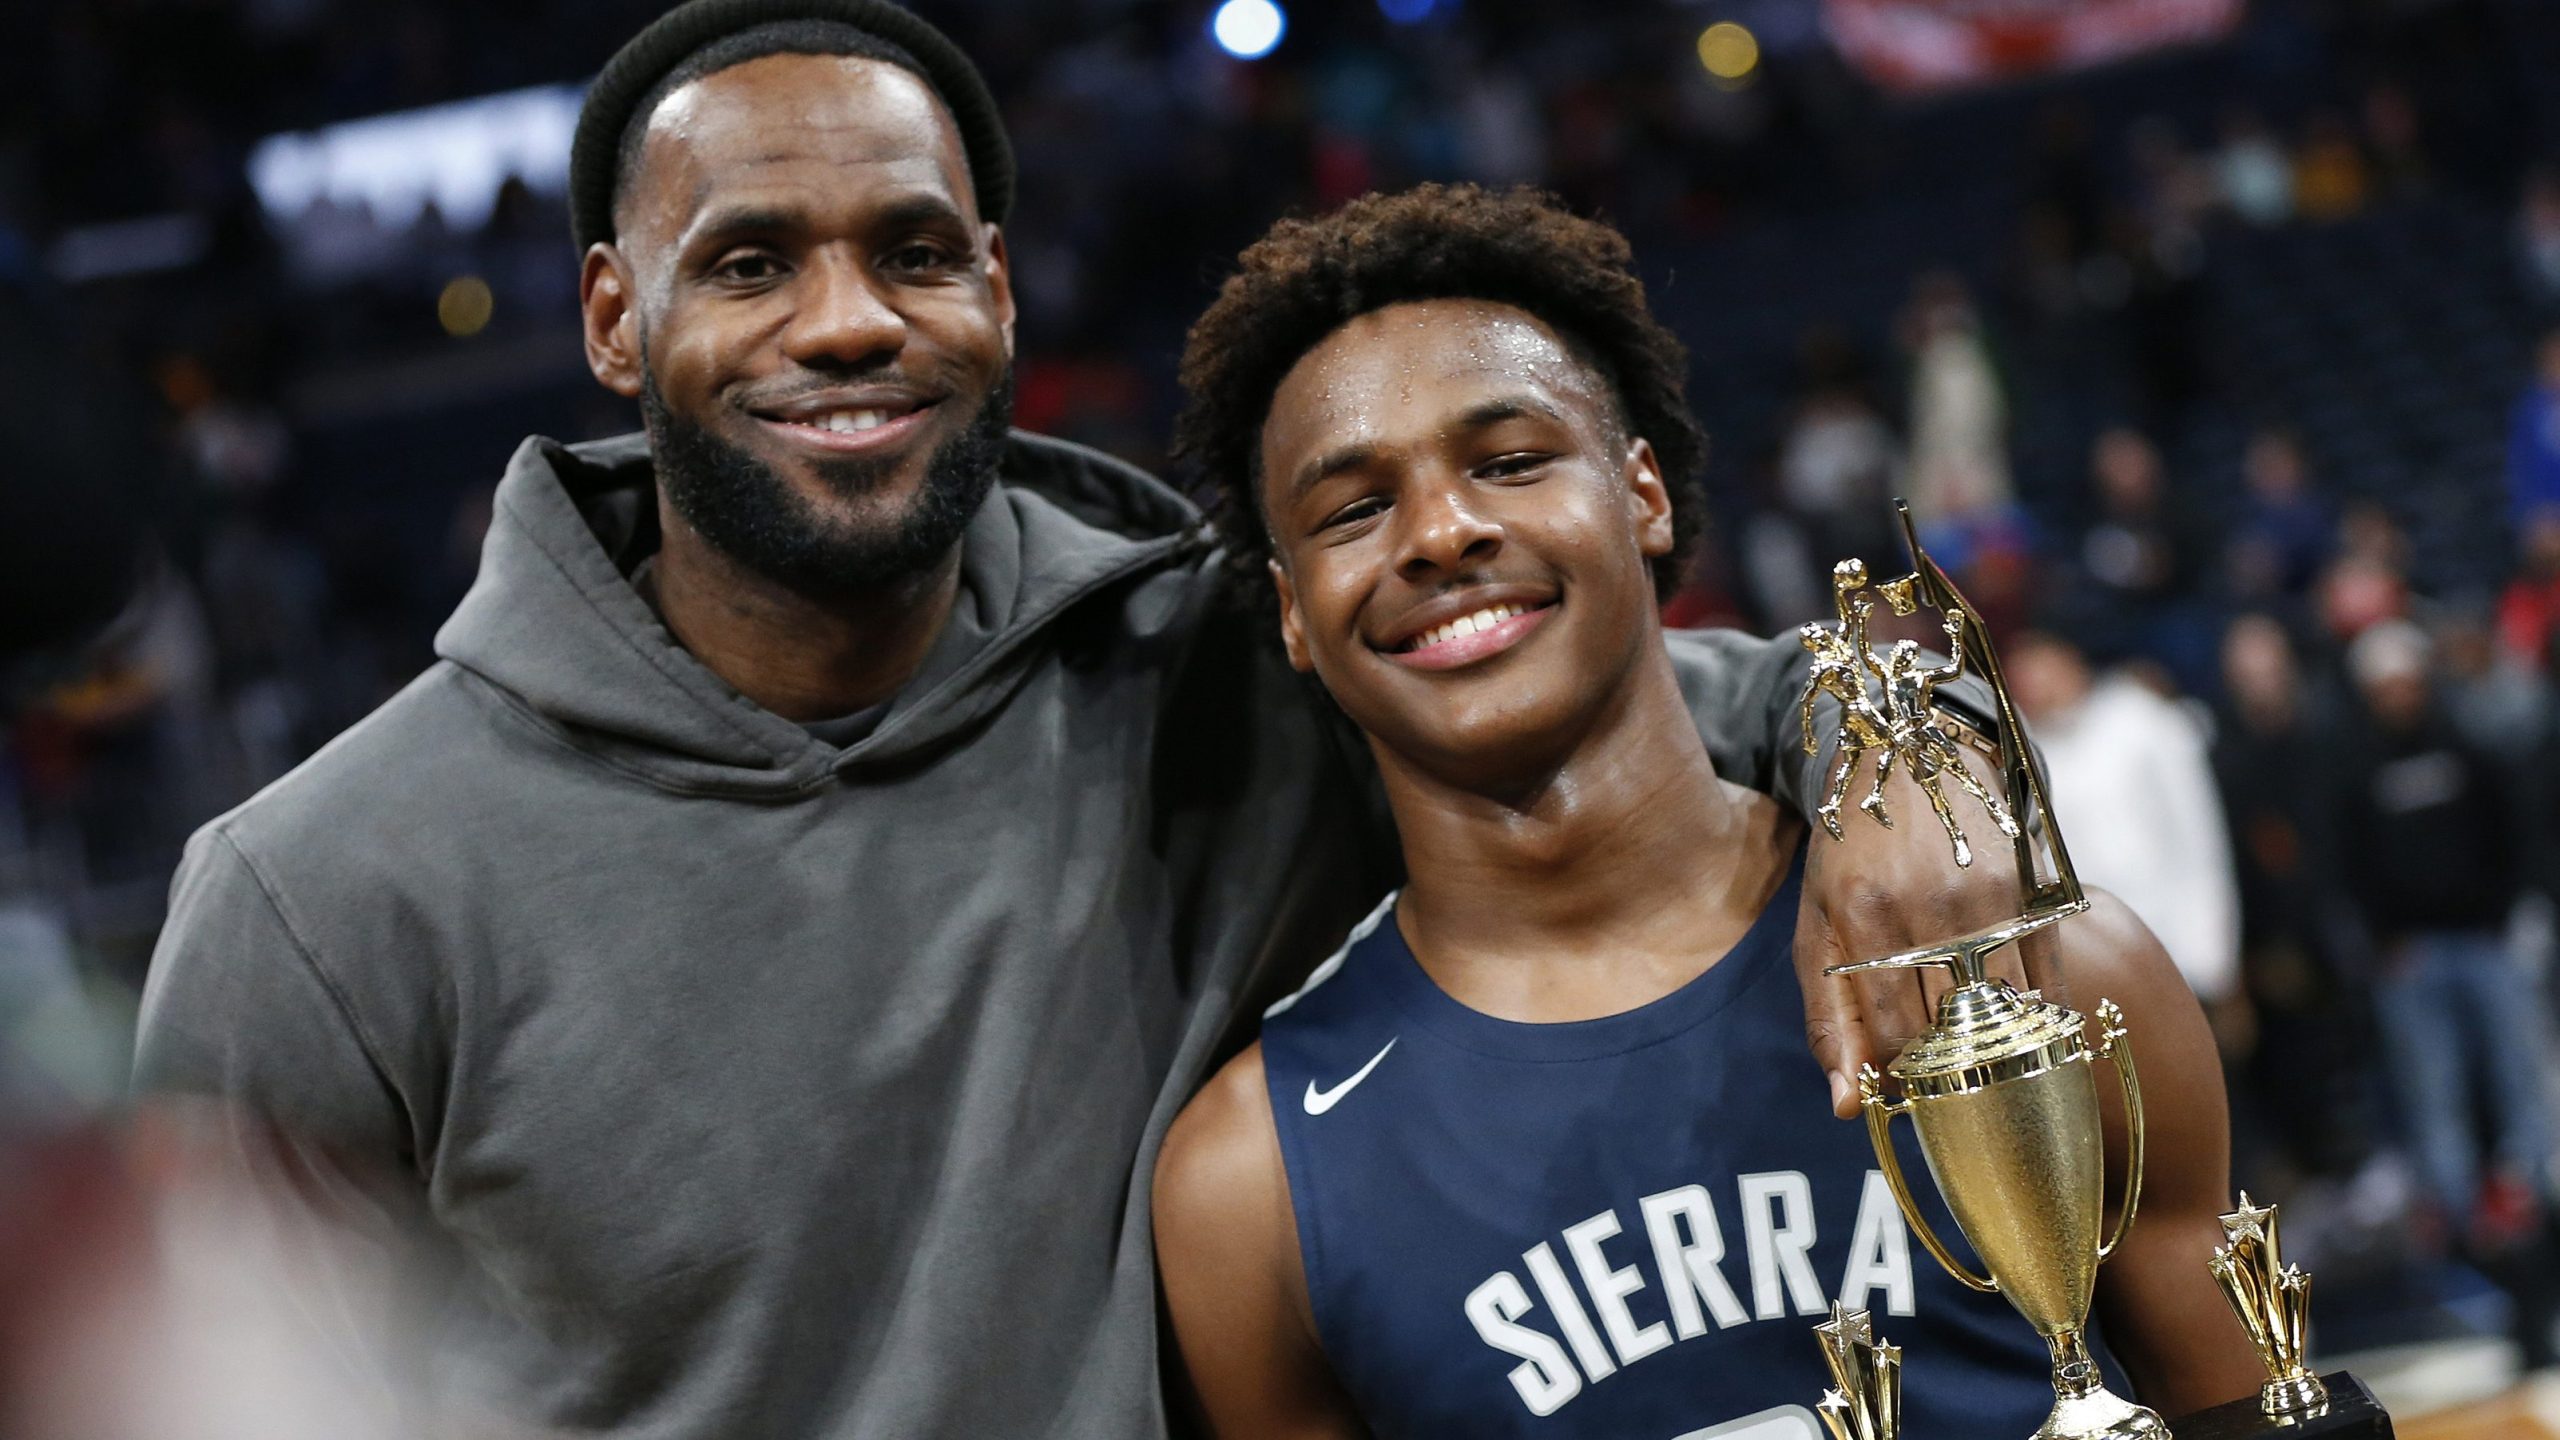 LeBron James hints he'll retire after son Bronny joins the NBA